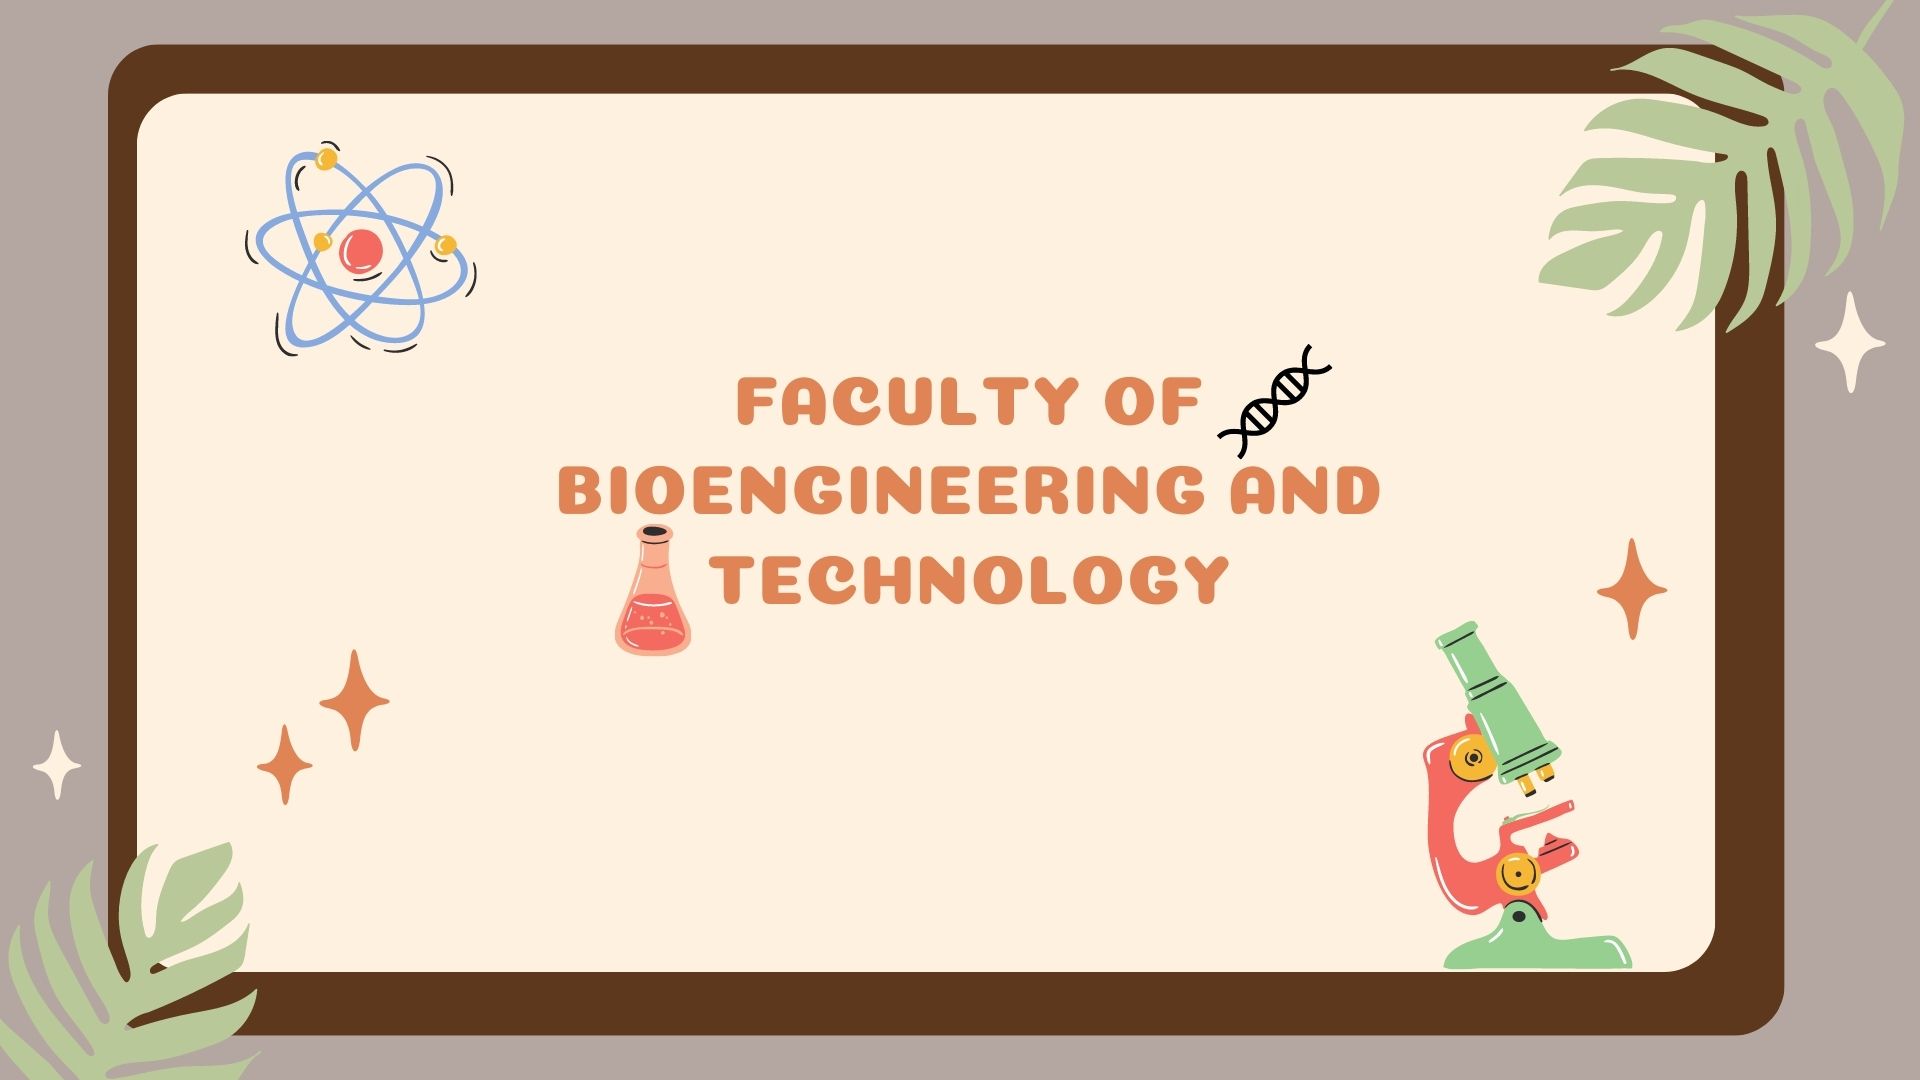 FACULTY OF BIOENGINEERING AND TECHNOLOGY